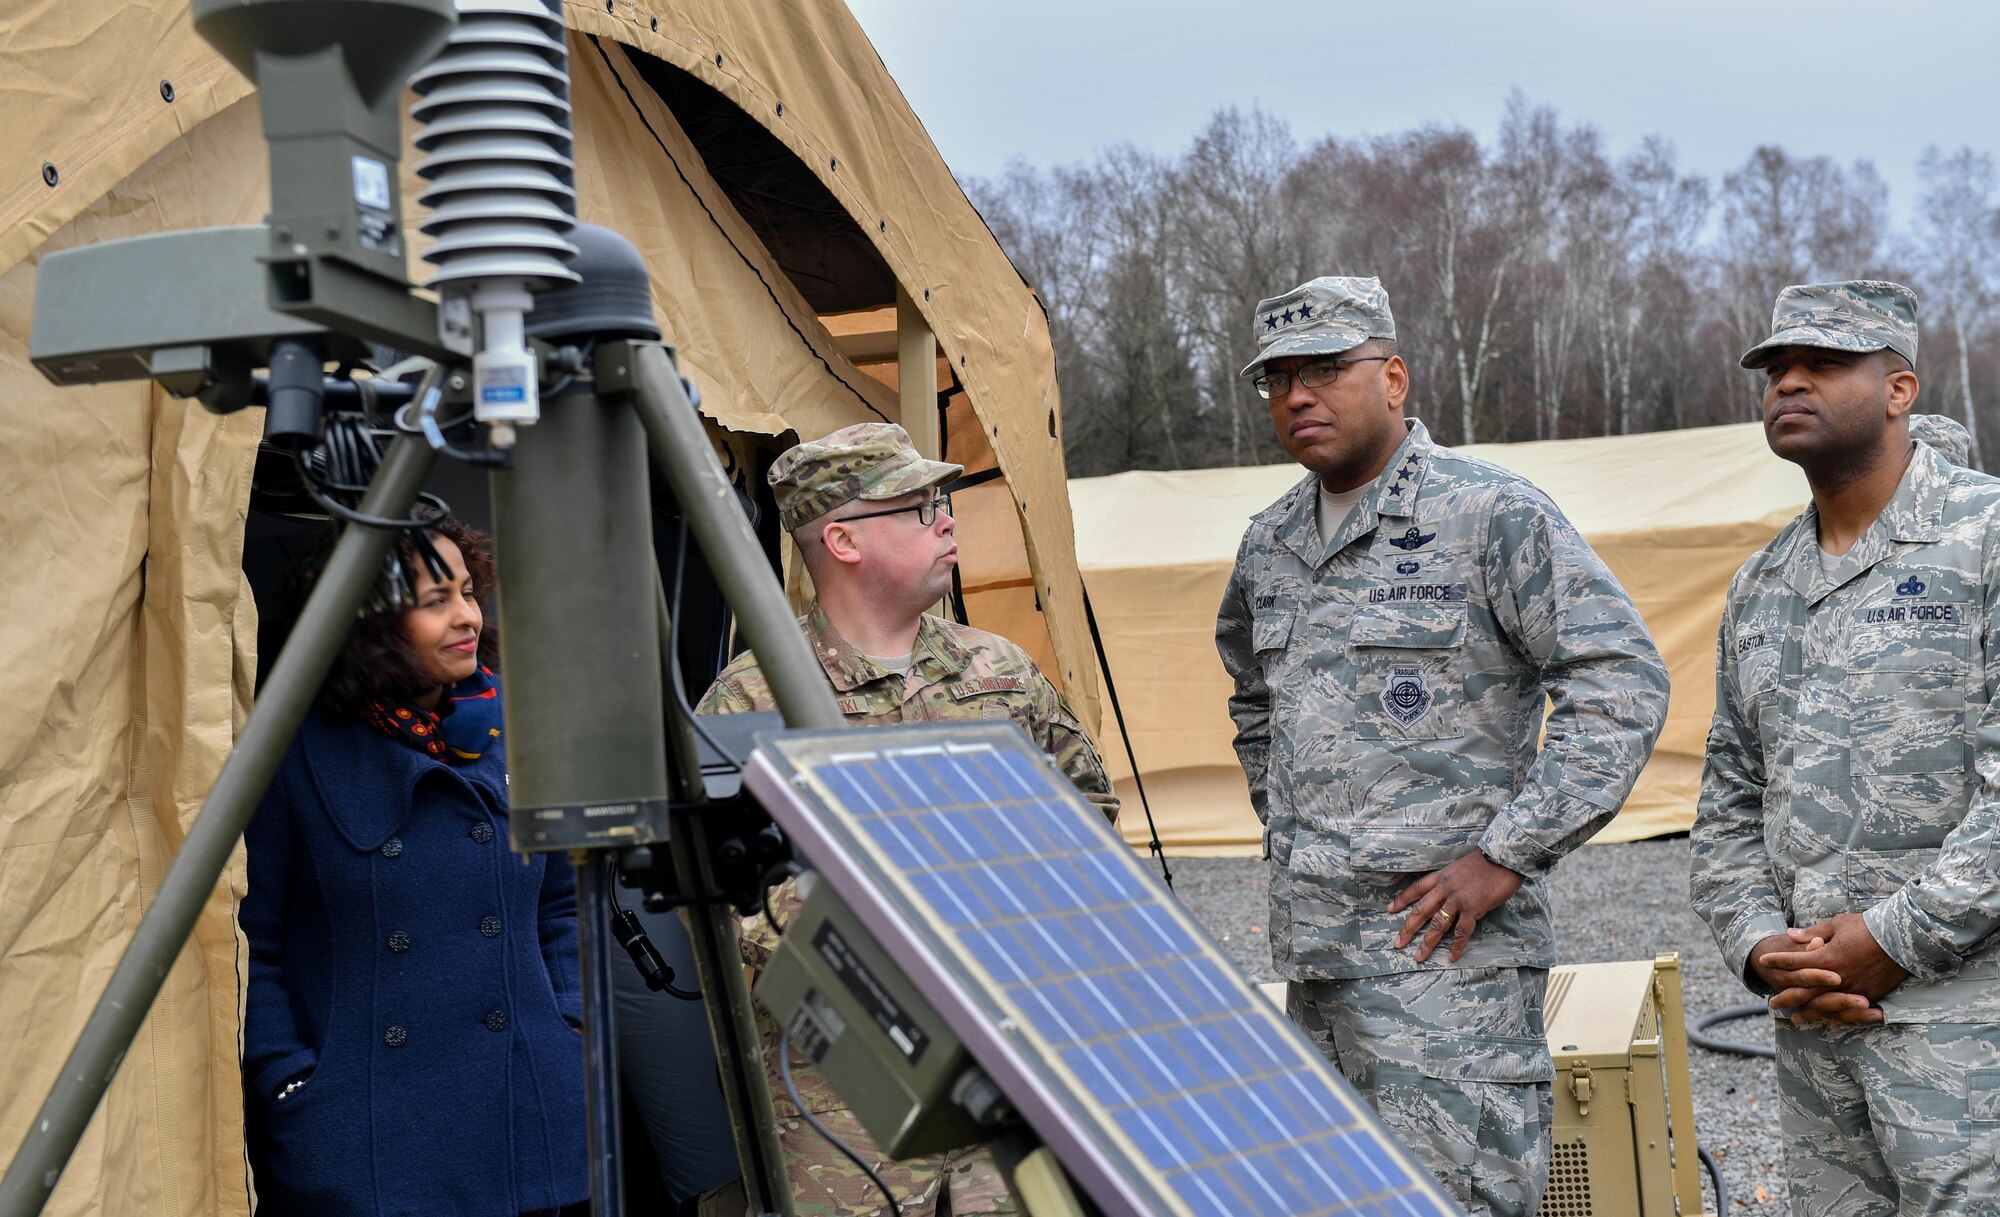 Master Sgt. Joshua Wisnewski, 7th Weather Squadron NCO in charge of training, briefs Lt. Gen. Richard M. Clark, 3rd Air Force commander, and Chief Master Sgt. Phillip Easton, U.S. Air Forces in Europe and Air Forces Africa command chief, about weather equipment during an immersion tour of the 435th Air Ground Operations Wing at Ramstein Air Base, Germany, Feb. 3, 2017. Clark, Easton, and their spouses toured squadrons within the 4th Air Support Operations Group, 435th Air and Space Communications Group, and 435th Contingency Response Group. (U.S. Air Force photo by Senior Airman Tryphena Mayhugh)